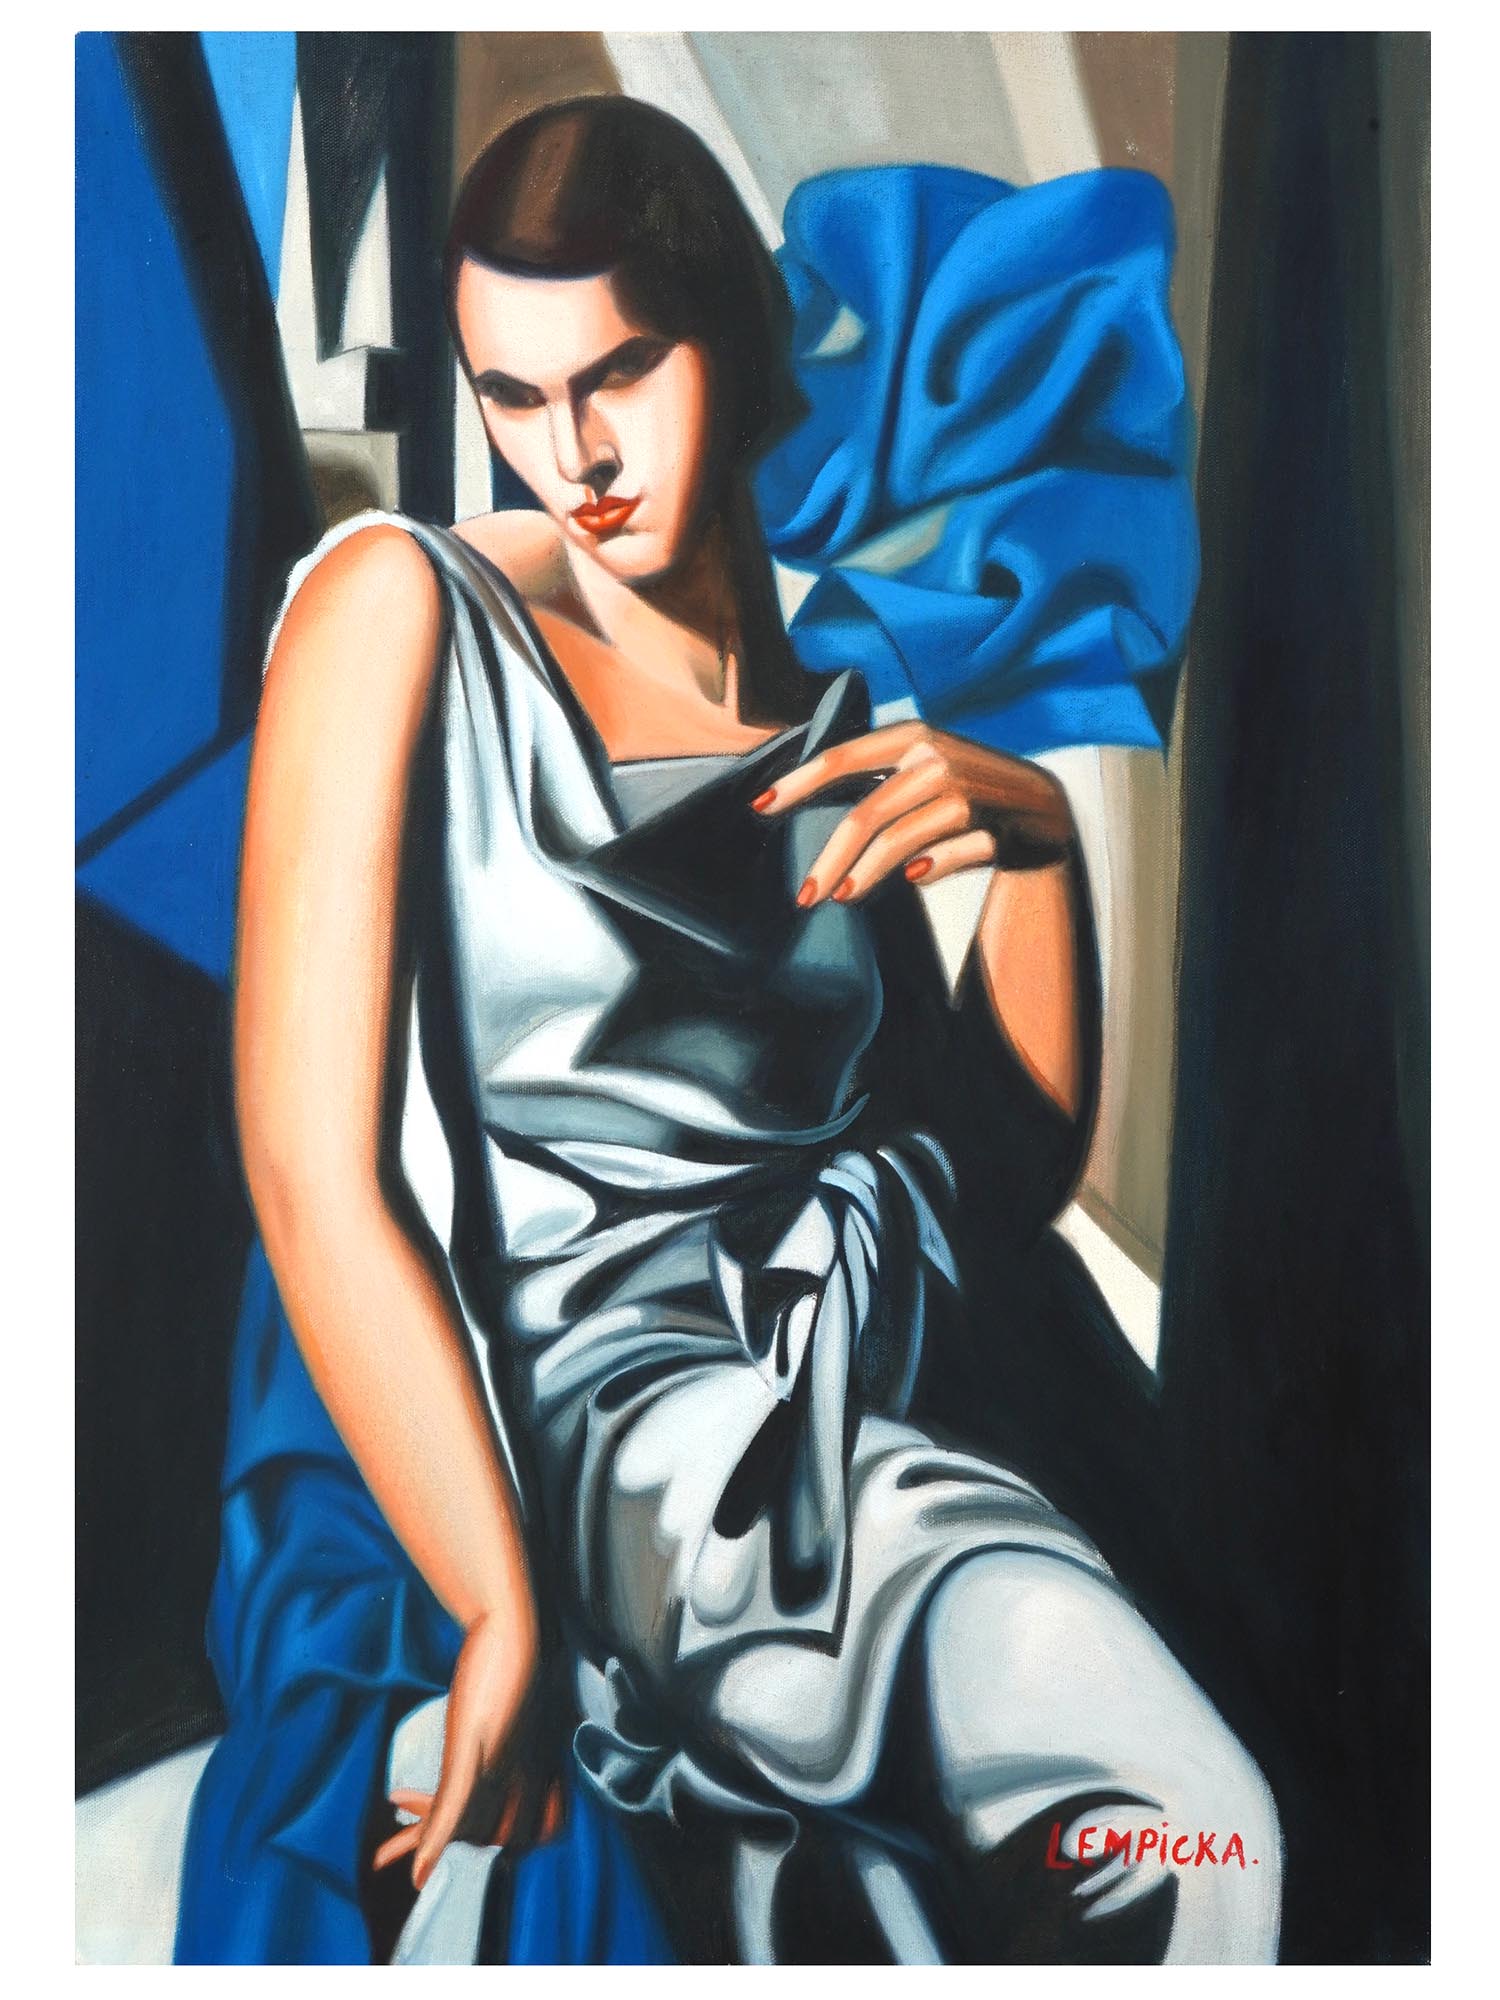 OIL PAINTING IN THE STYLE OF TAMARA DE LEMPICKA PIC-0